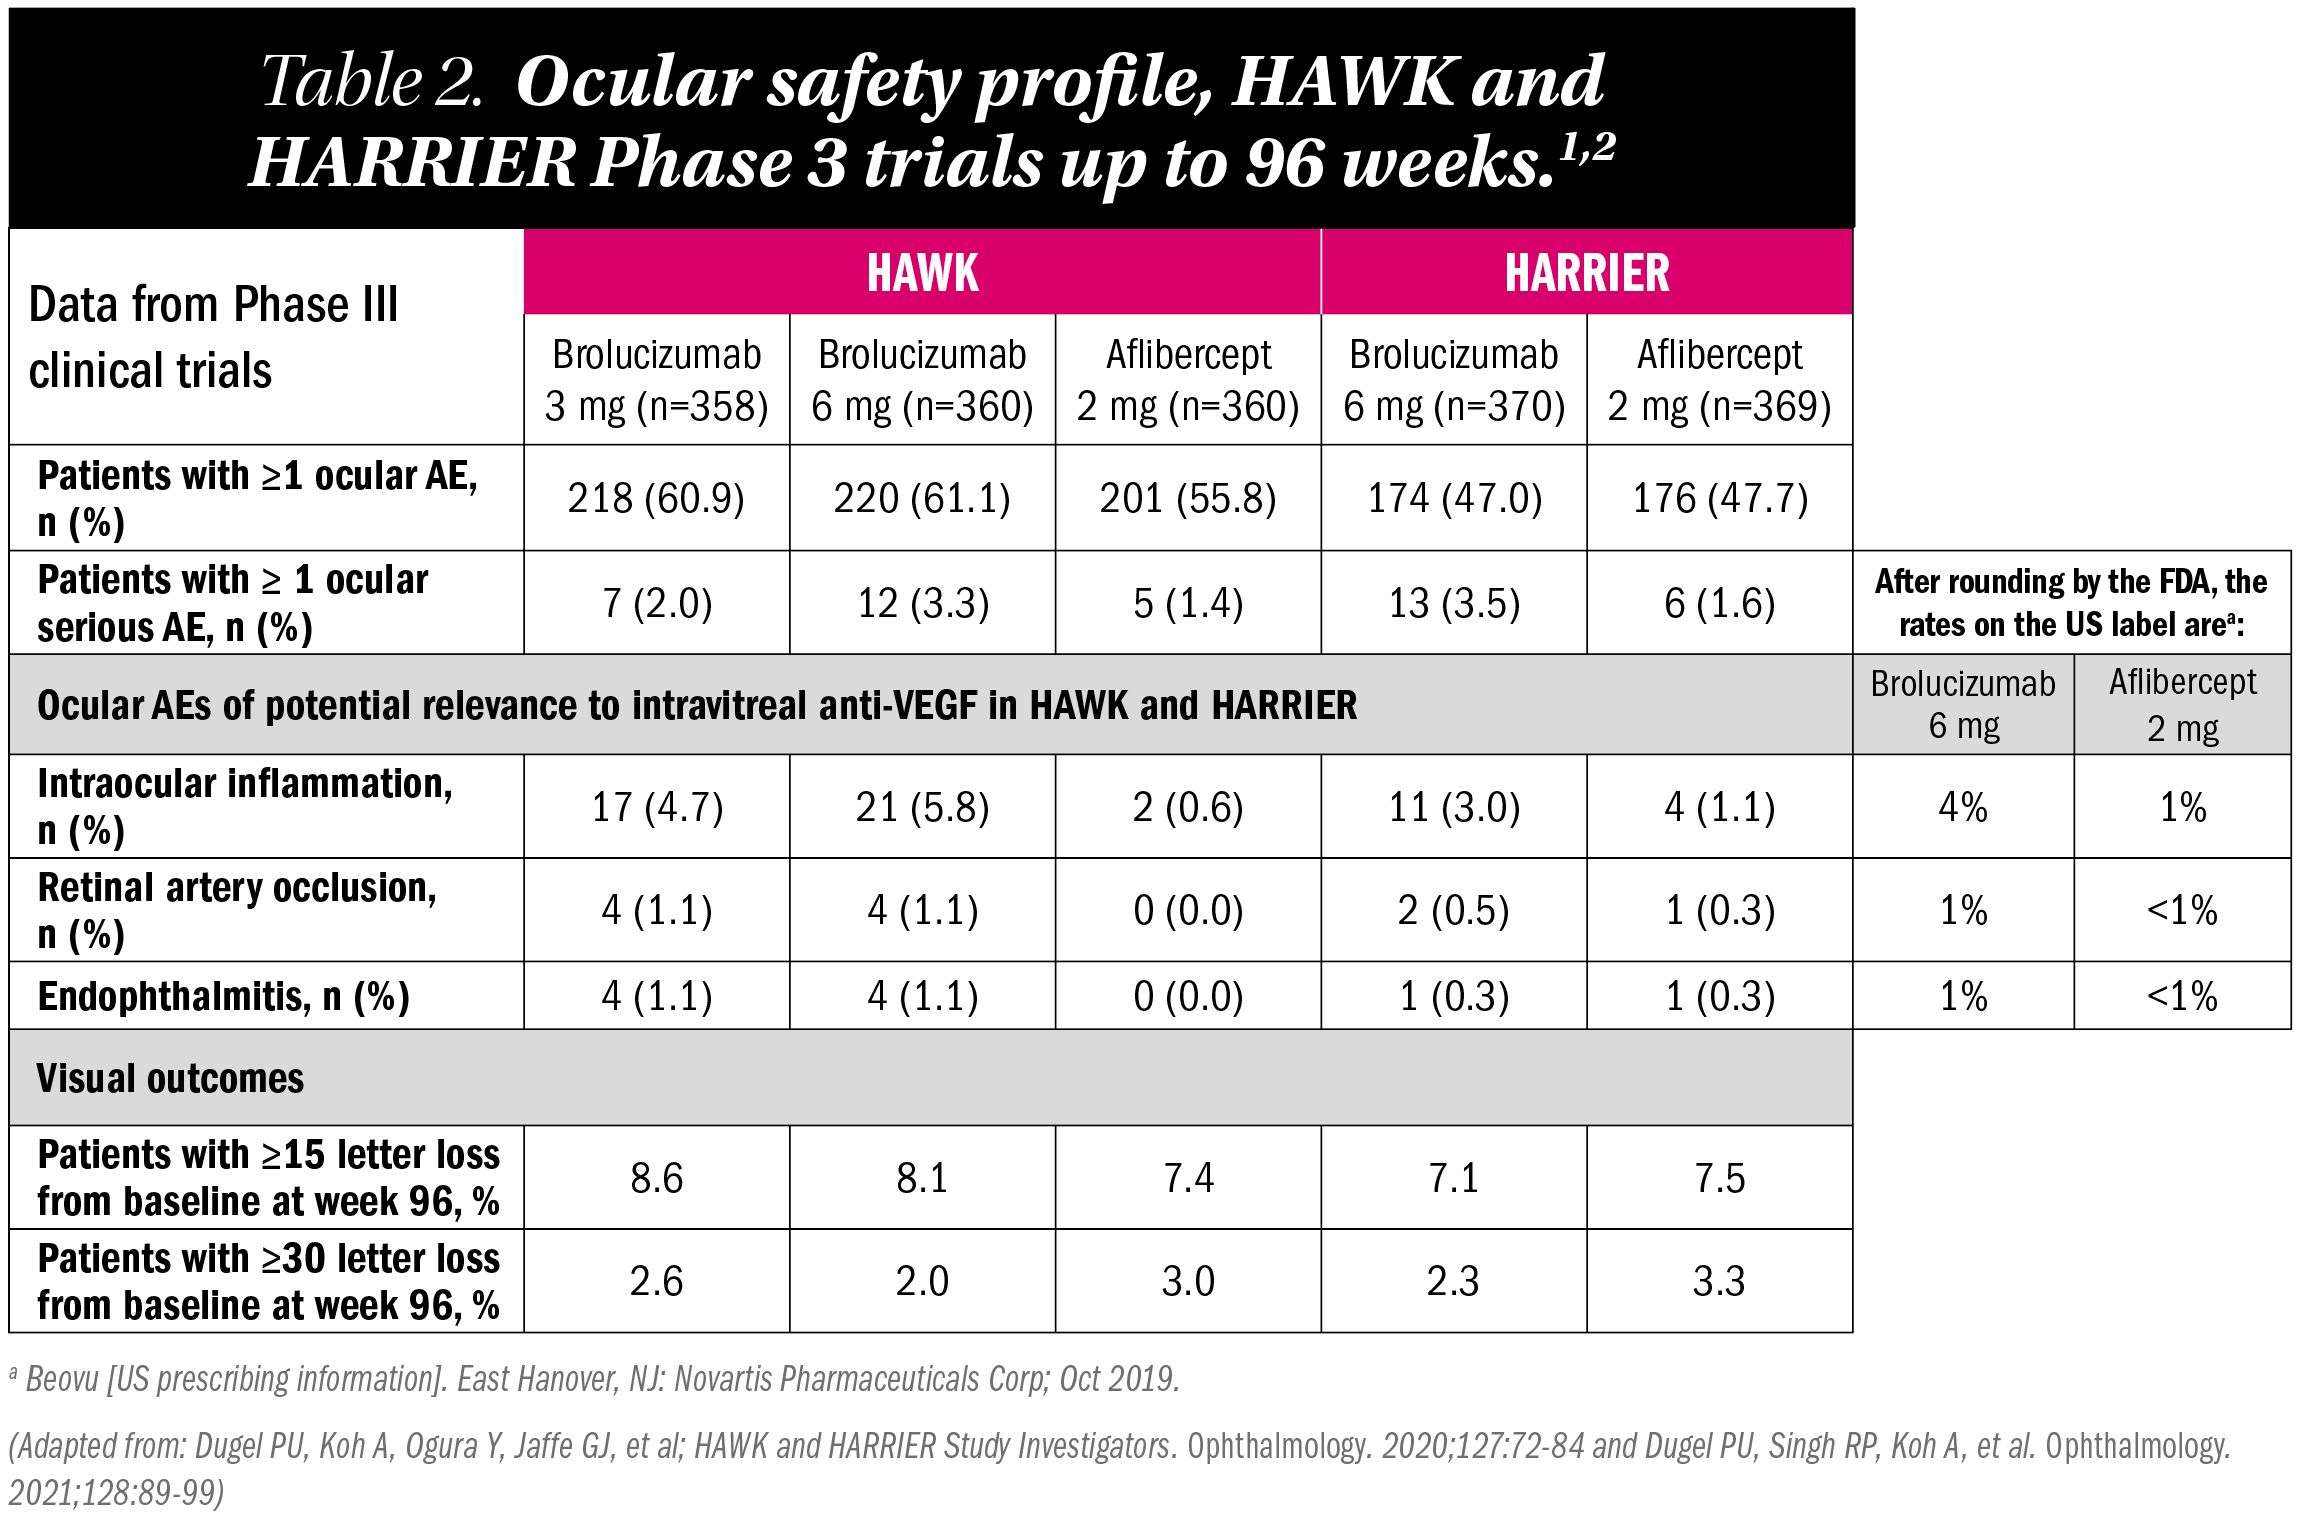 Table: Ocular safety profile, HAWK and HARRIER phase 3 trials up to 96 weeks